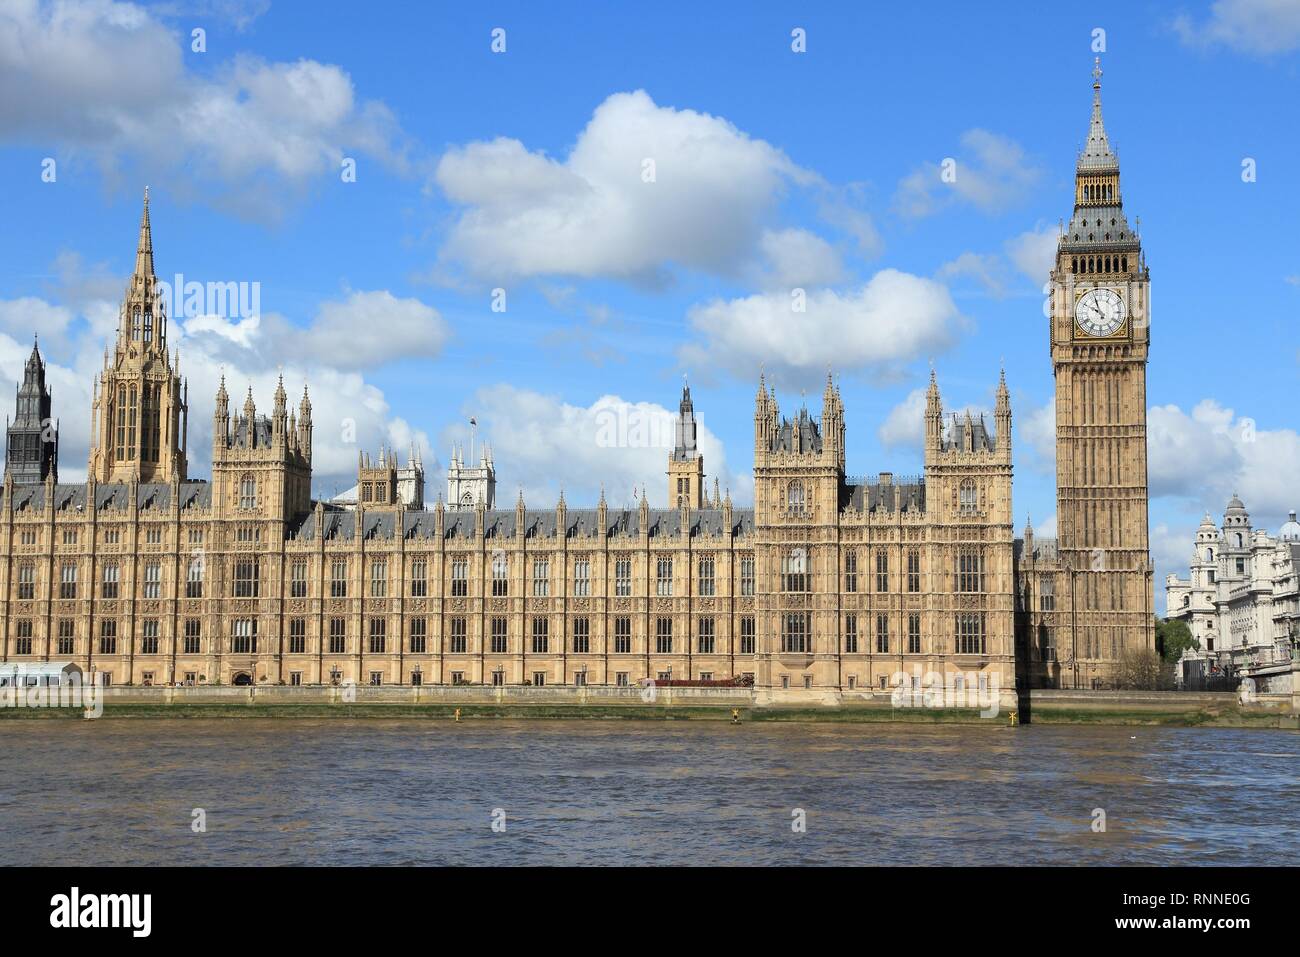 London, UK - Palace of Westminster (Houses of Parliament) with Big Ben clock tower. UNESCO World Heritage Site. Stock Photo